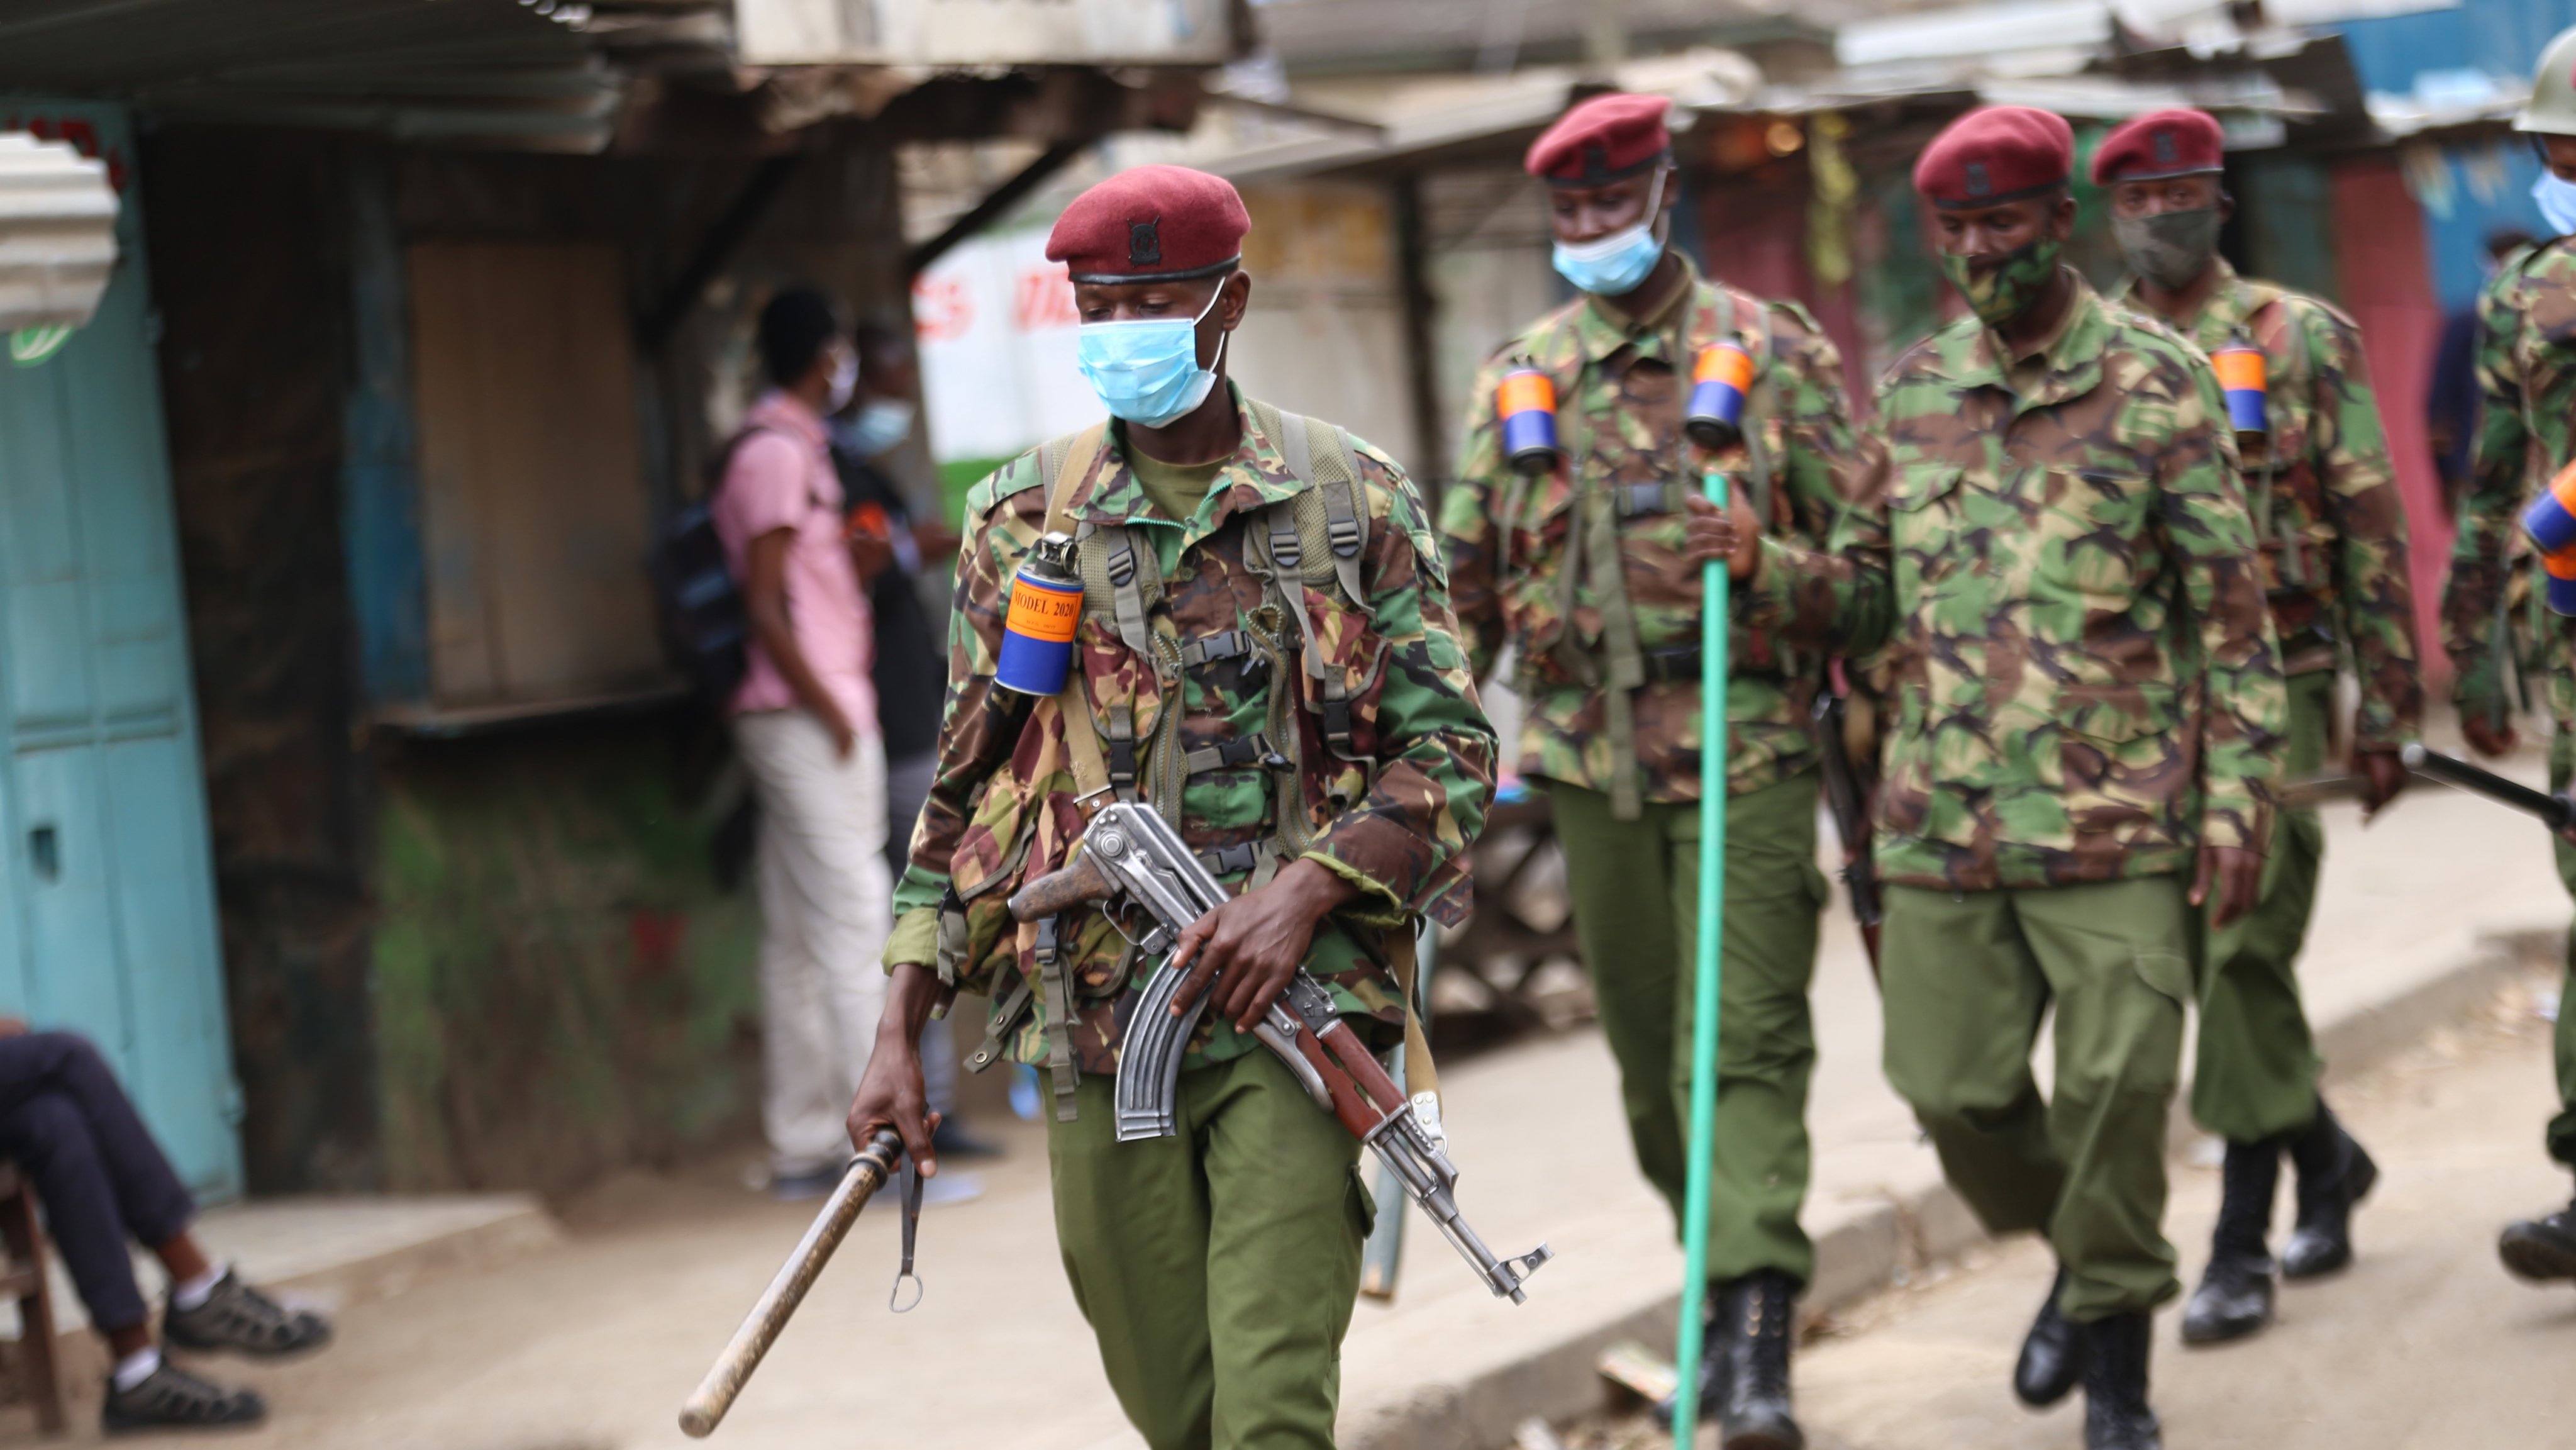 Police officers patrol the streets of Eastleigh during the